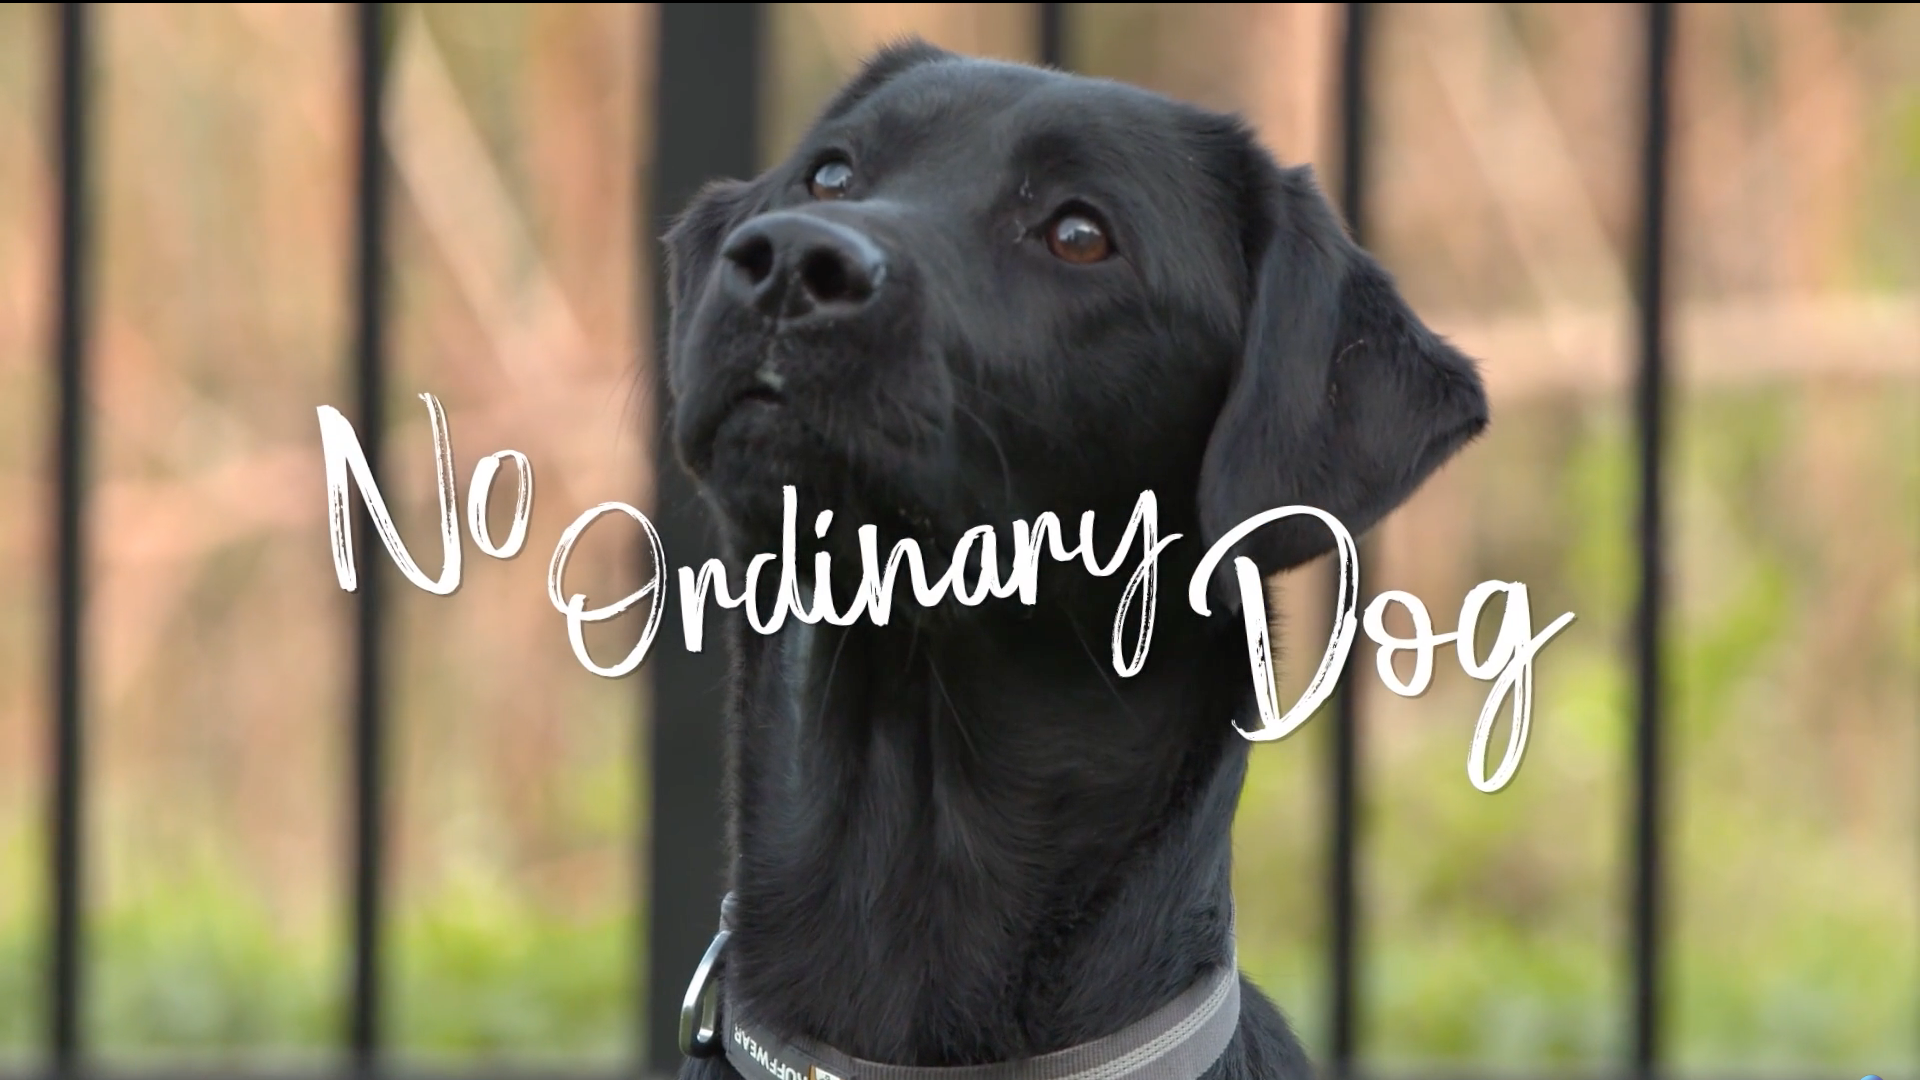 Text: No Ordinary Dog, pictured with a Black lab looking up